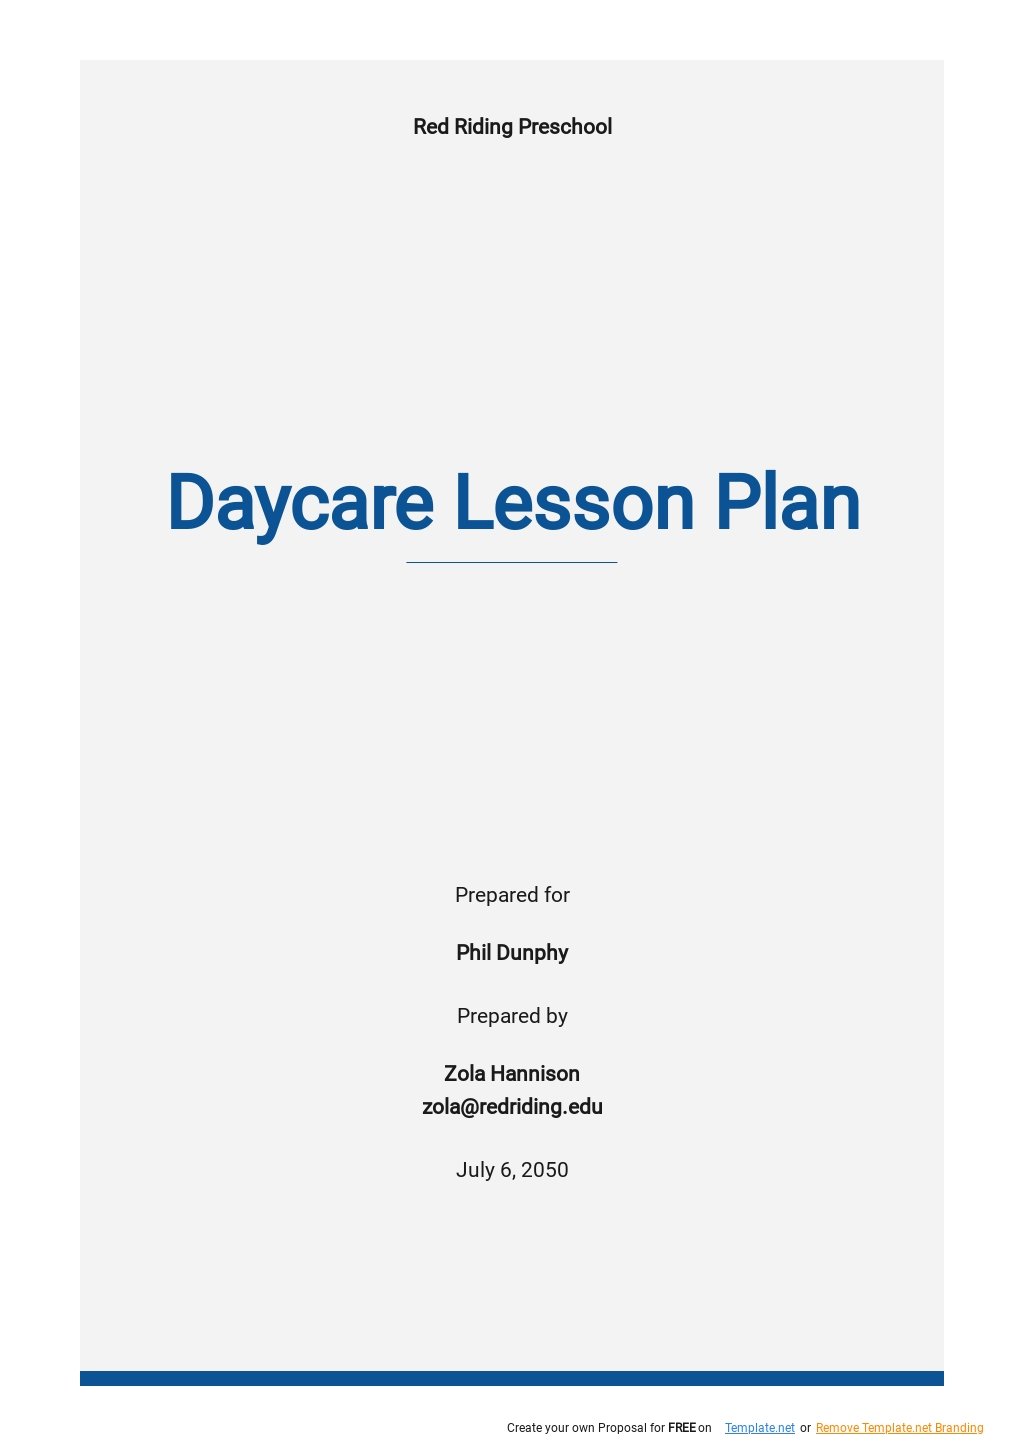 Simple Daycare Lesson Plan Template.jpe